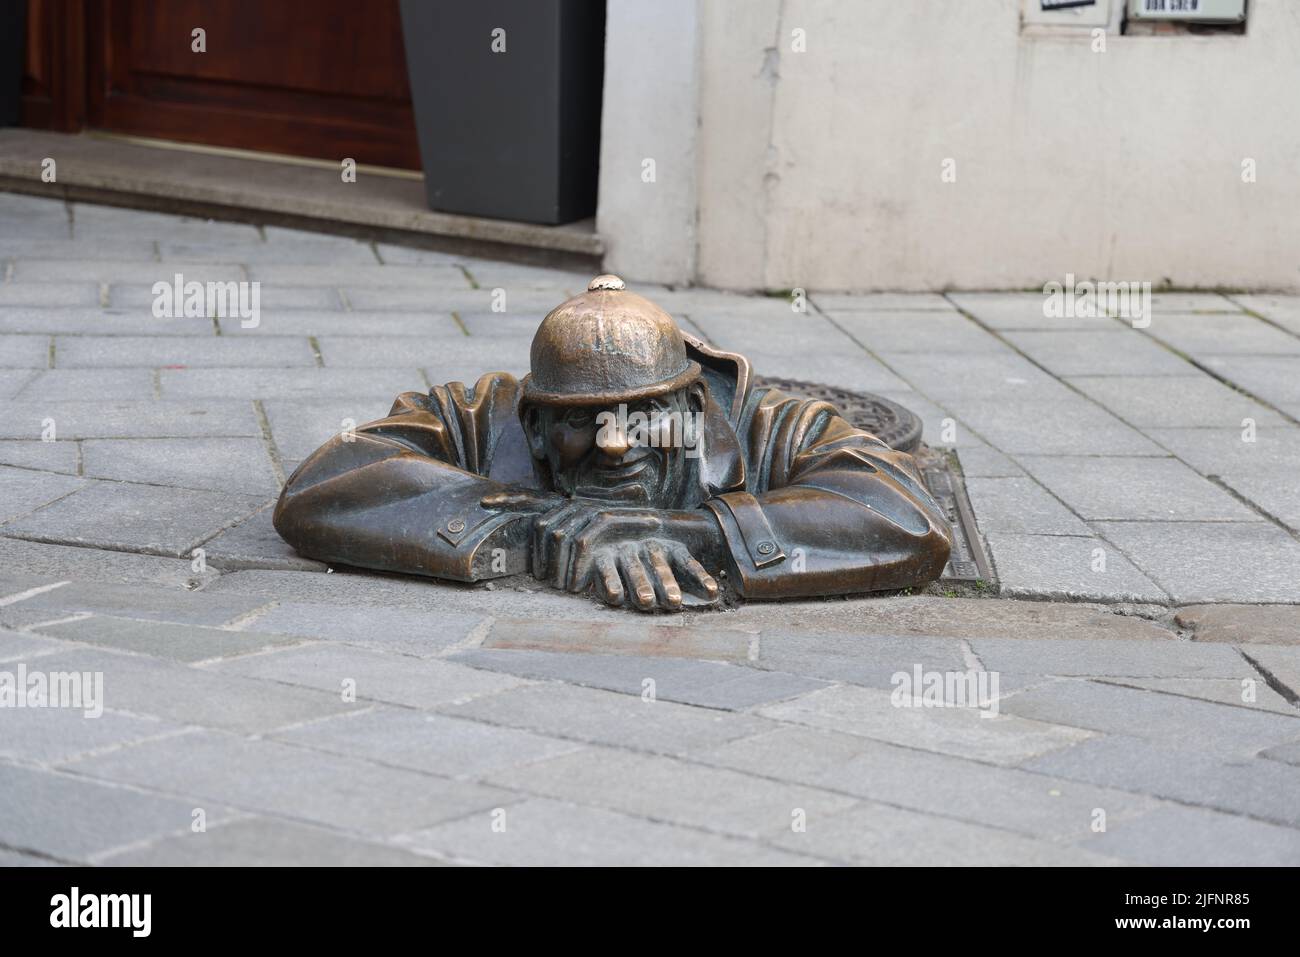 Quirky bronze statue (1997) of a sewer worker (Čumil, the watcher) emerging from a manhole in the center of Bratislava, Slovakia. Is he a peeping tom? Stock Photo